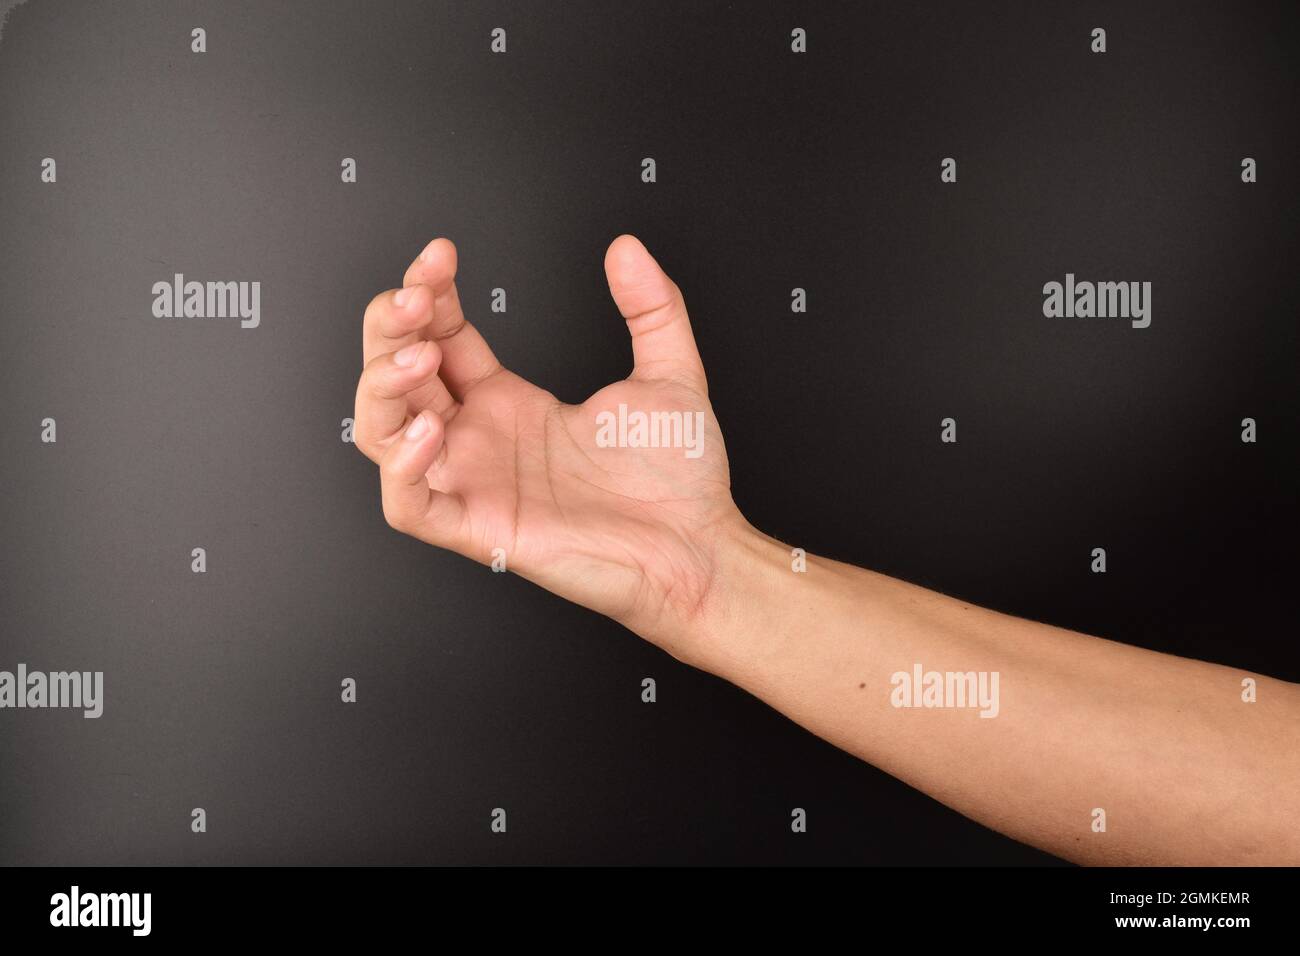 angry hand gesture on dark background Stock Photo